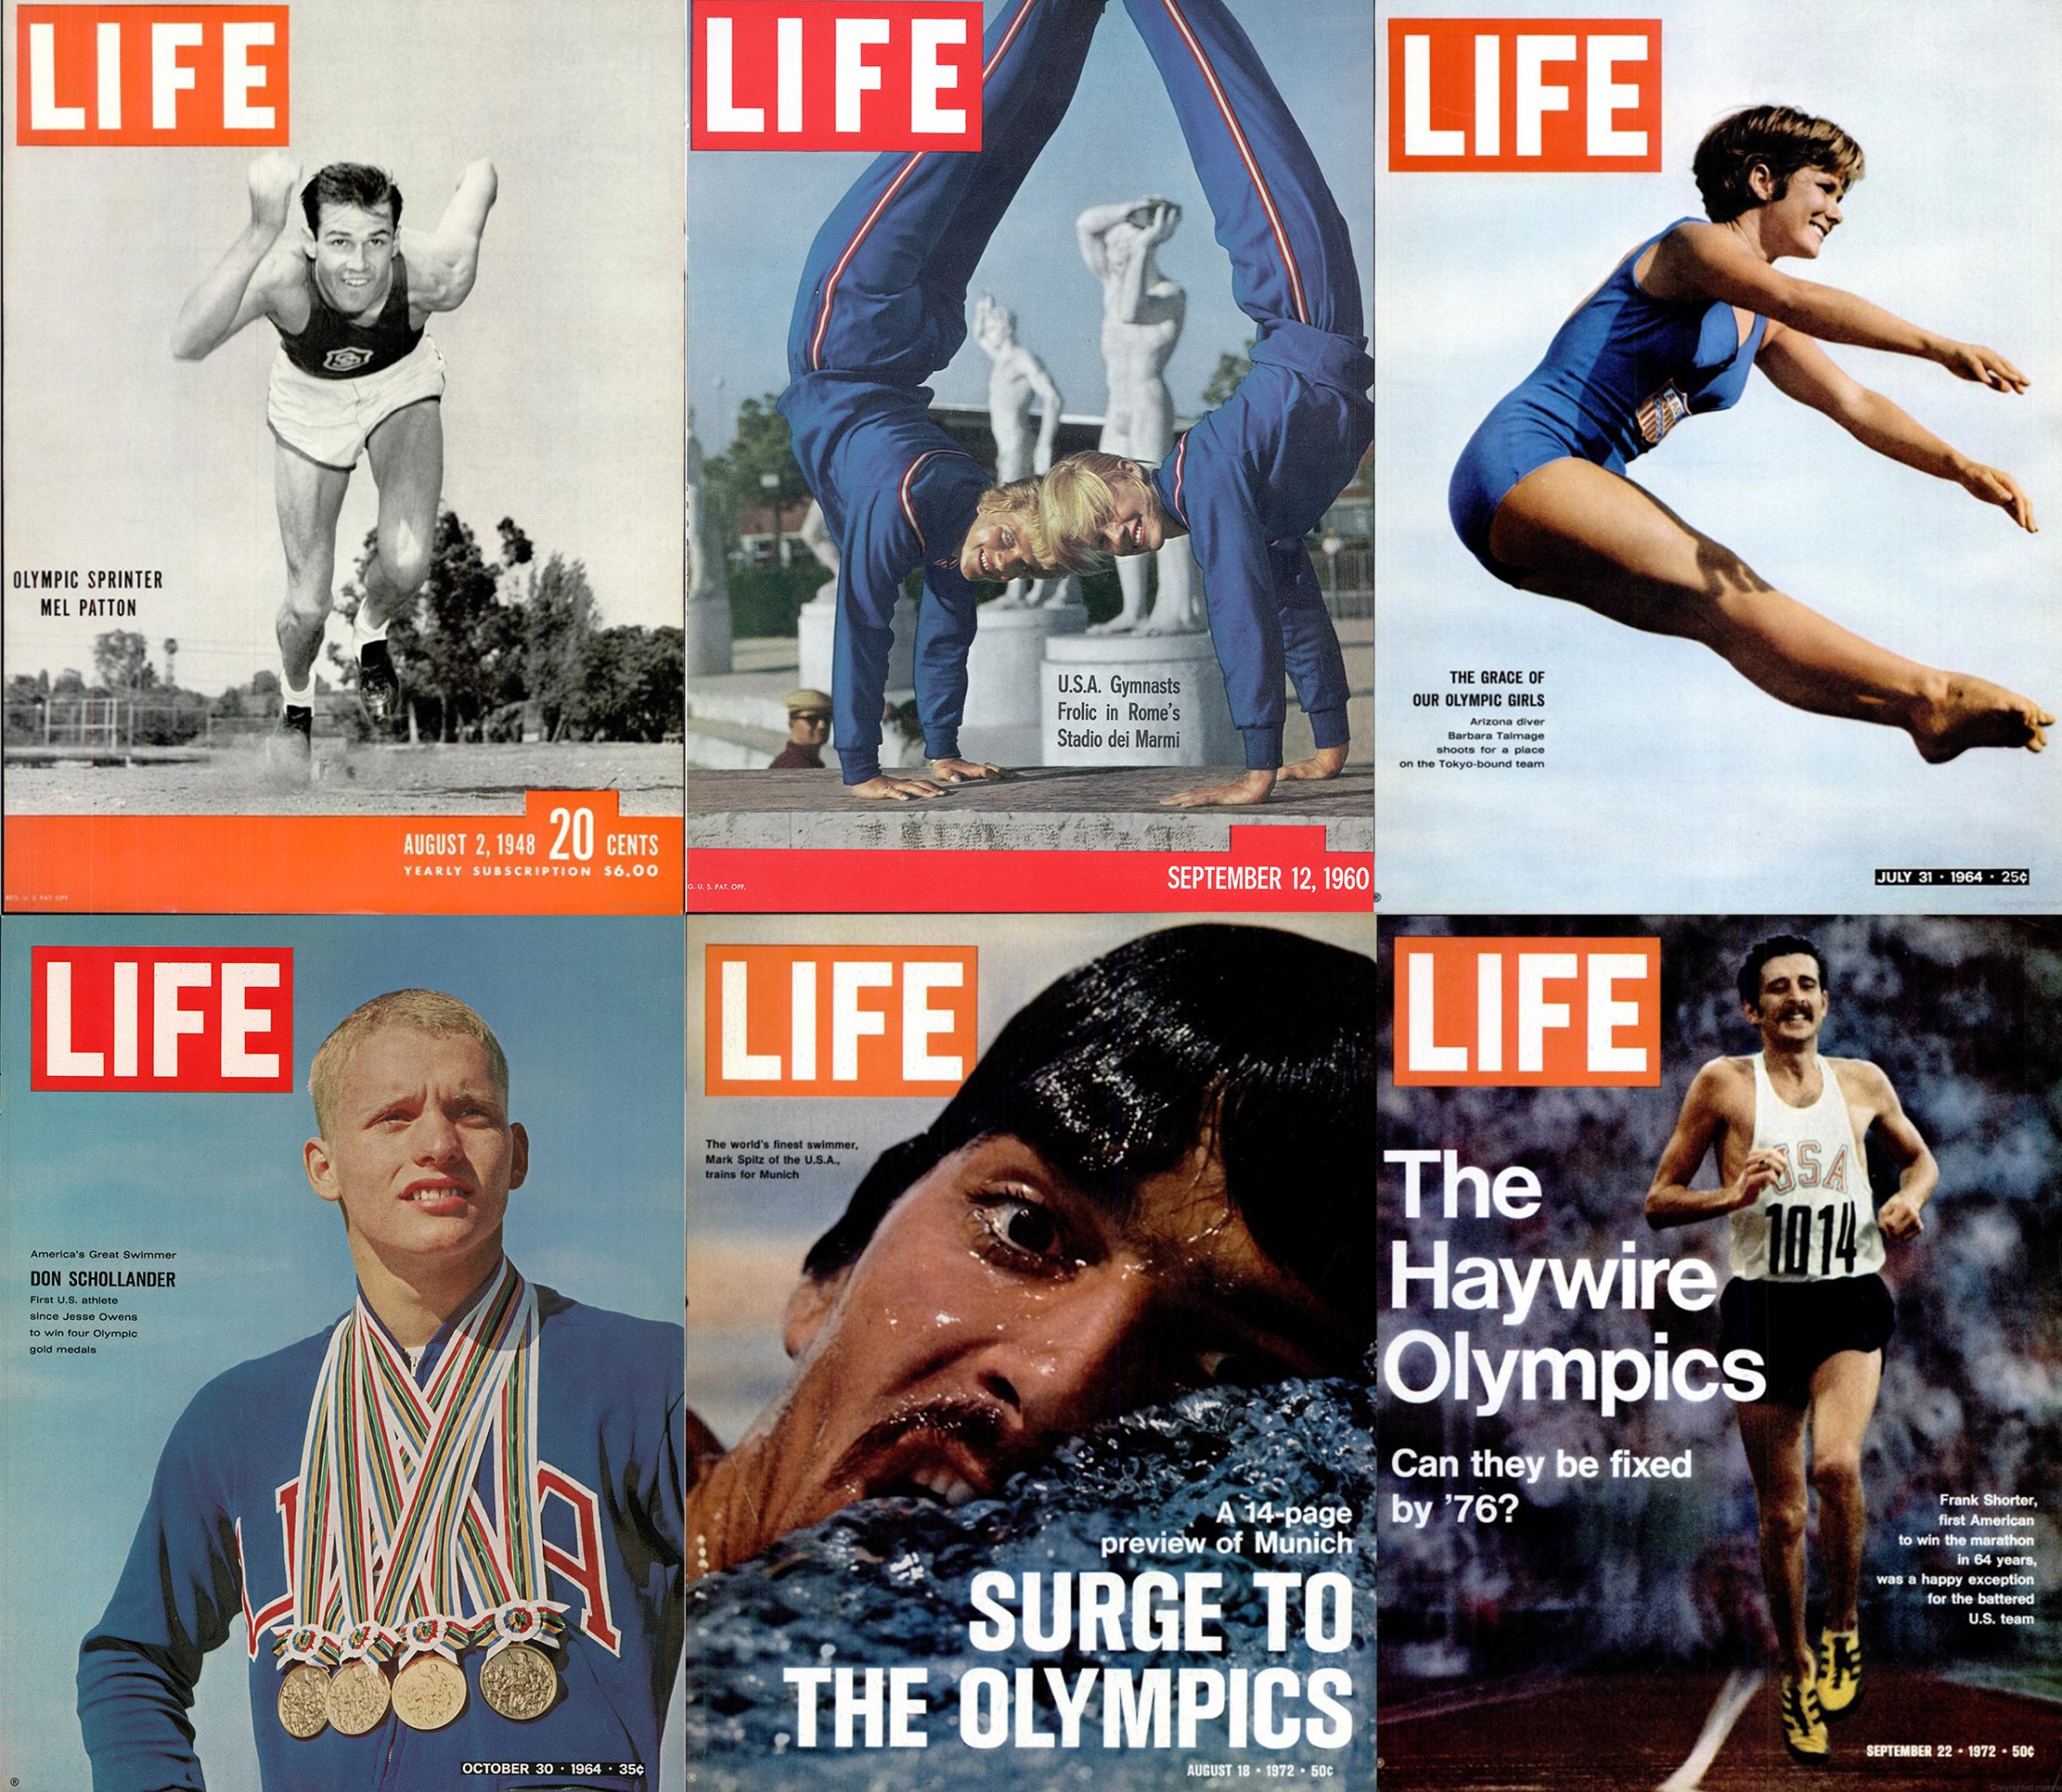 LIFE magazine Olympic covers through the years.